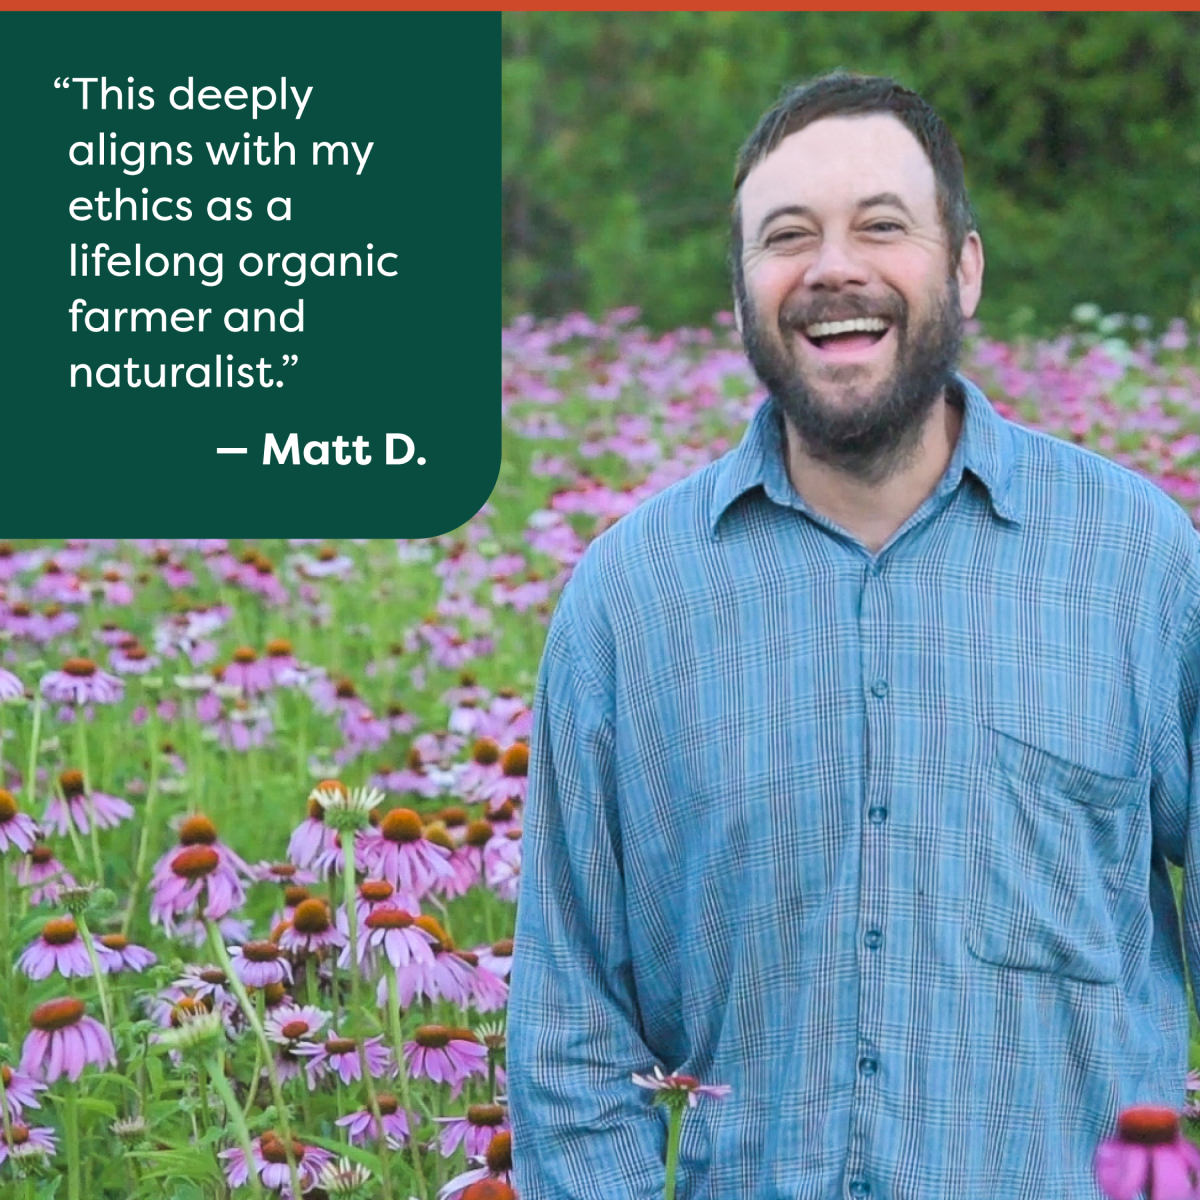 This deeply aligns with my ethics as a lifelong organic farmer and naturalist. - Matt D.